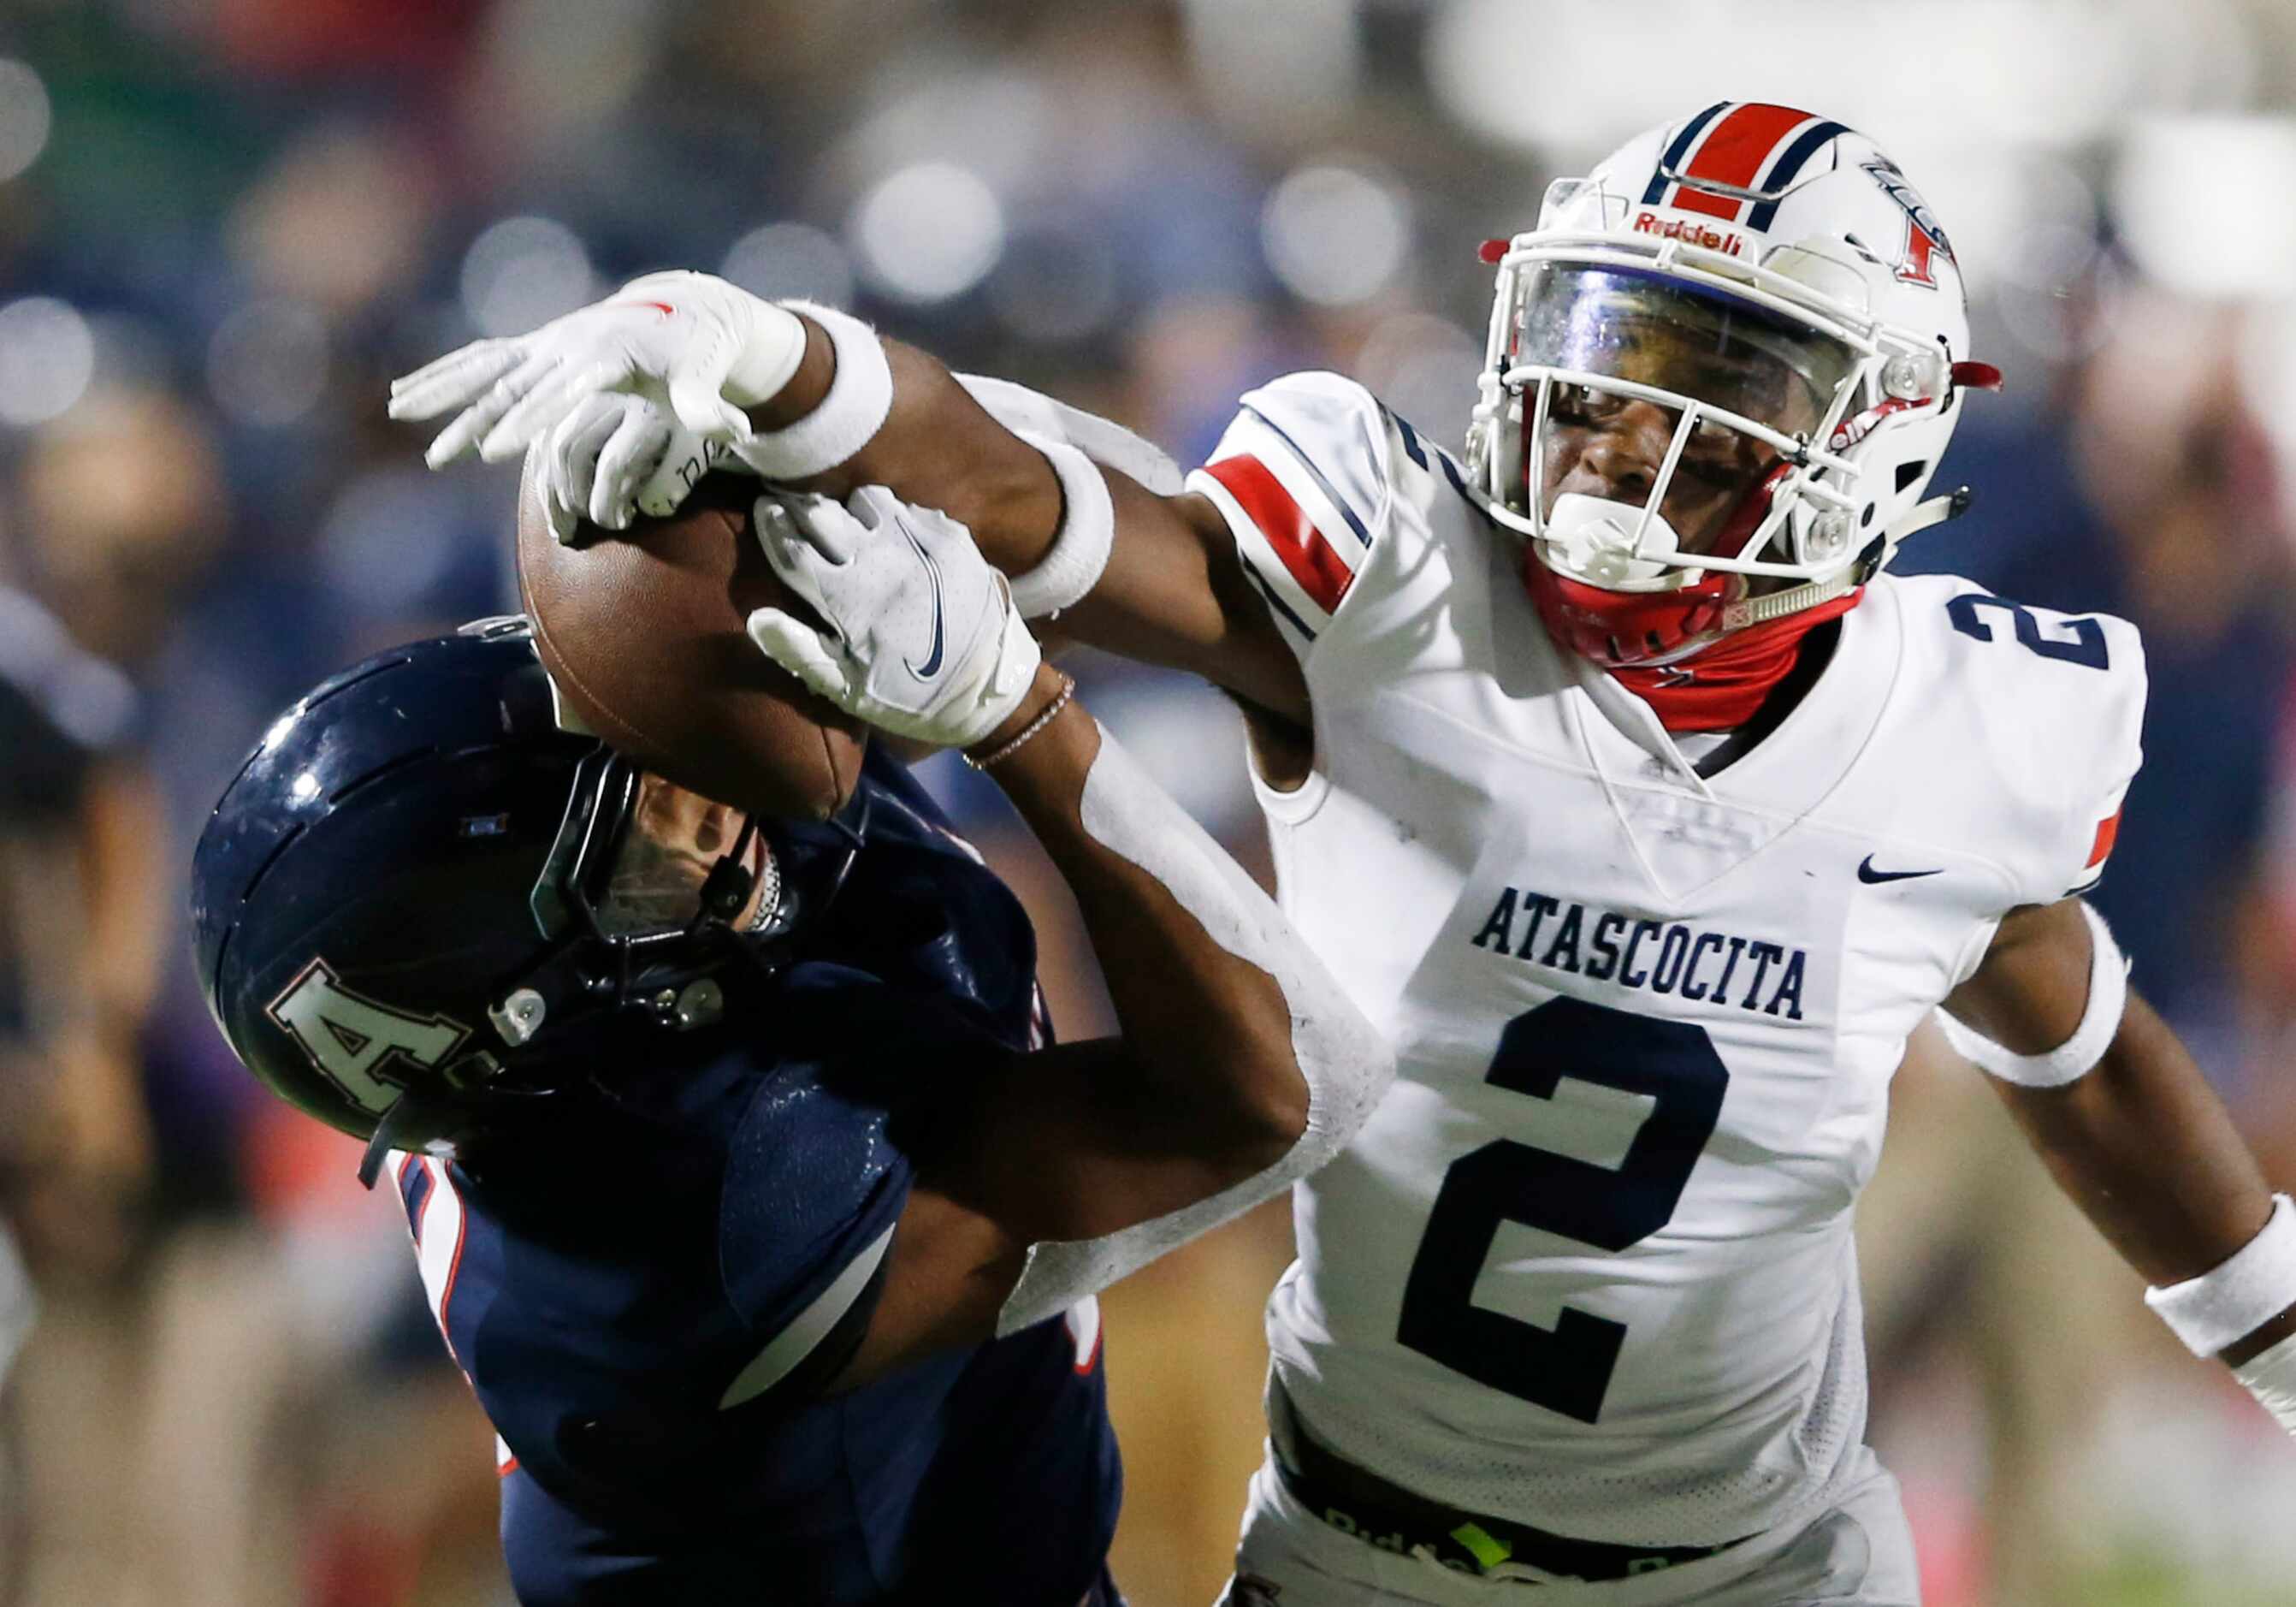 Allen's Blaine Green (8) gets the ball knocked out of his hands by Humble Atascocita's Caleb...